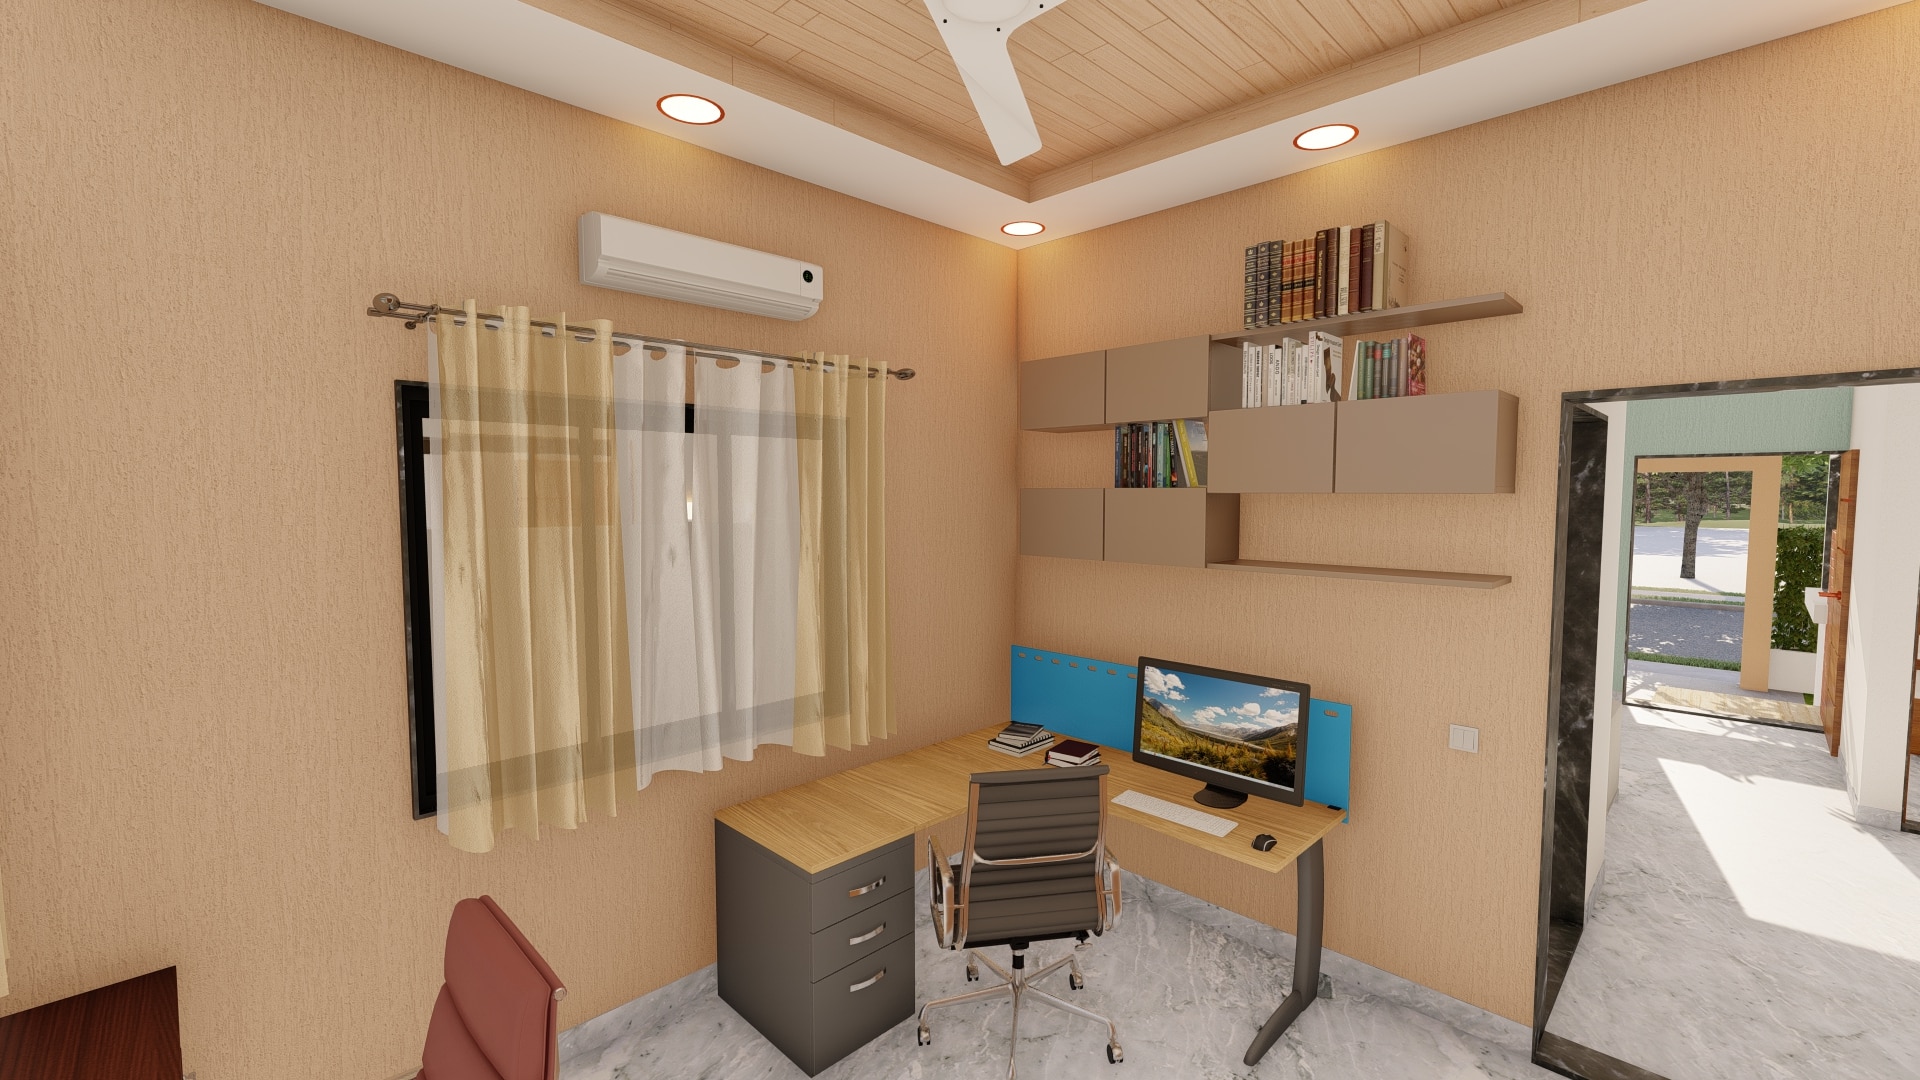 work from home office modern bungalow house layout by urban terrace east facing 1500 ft